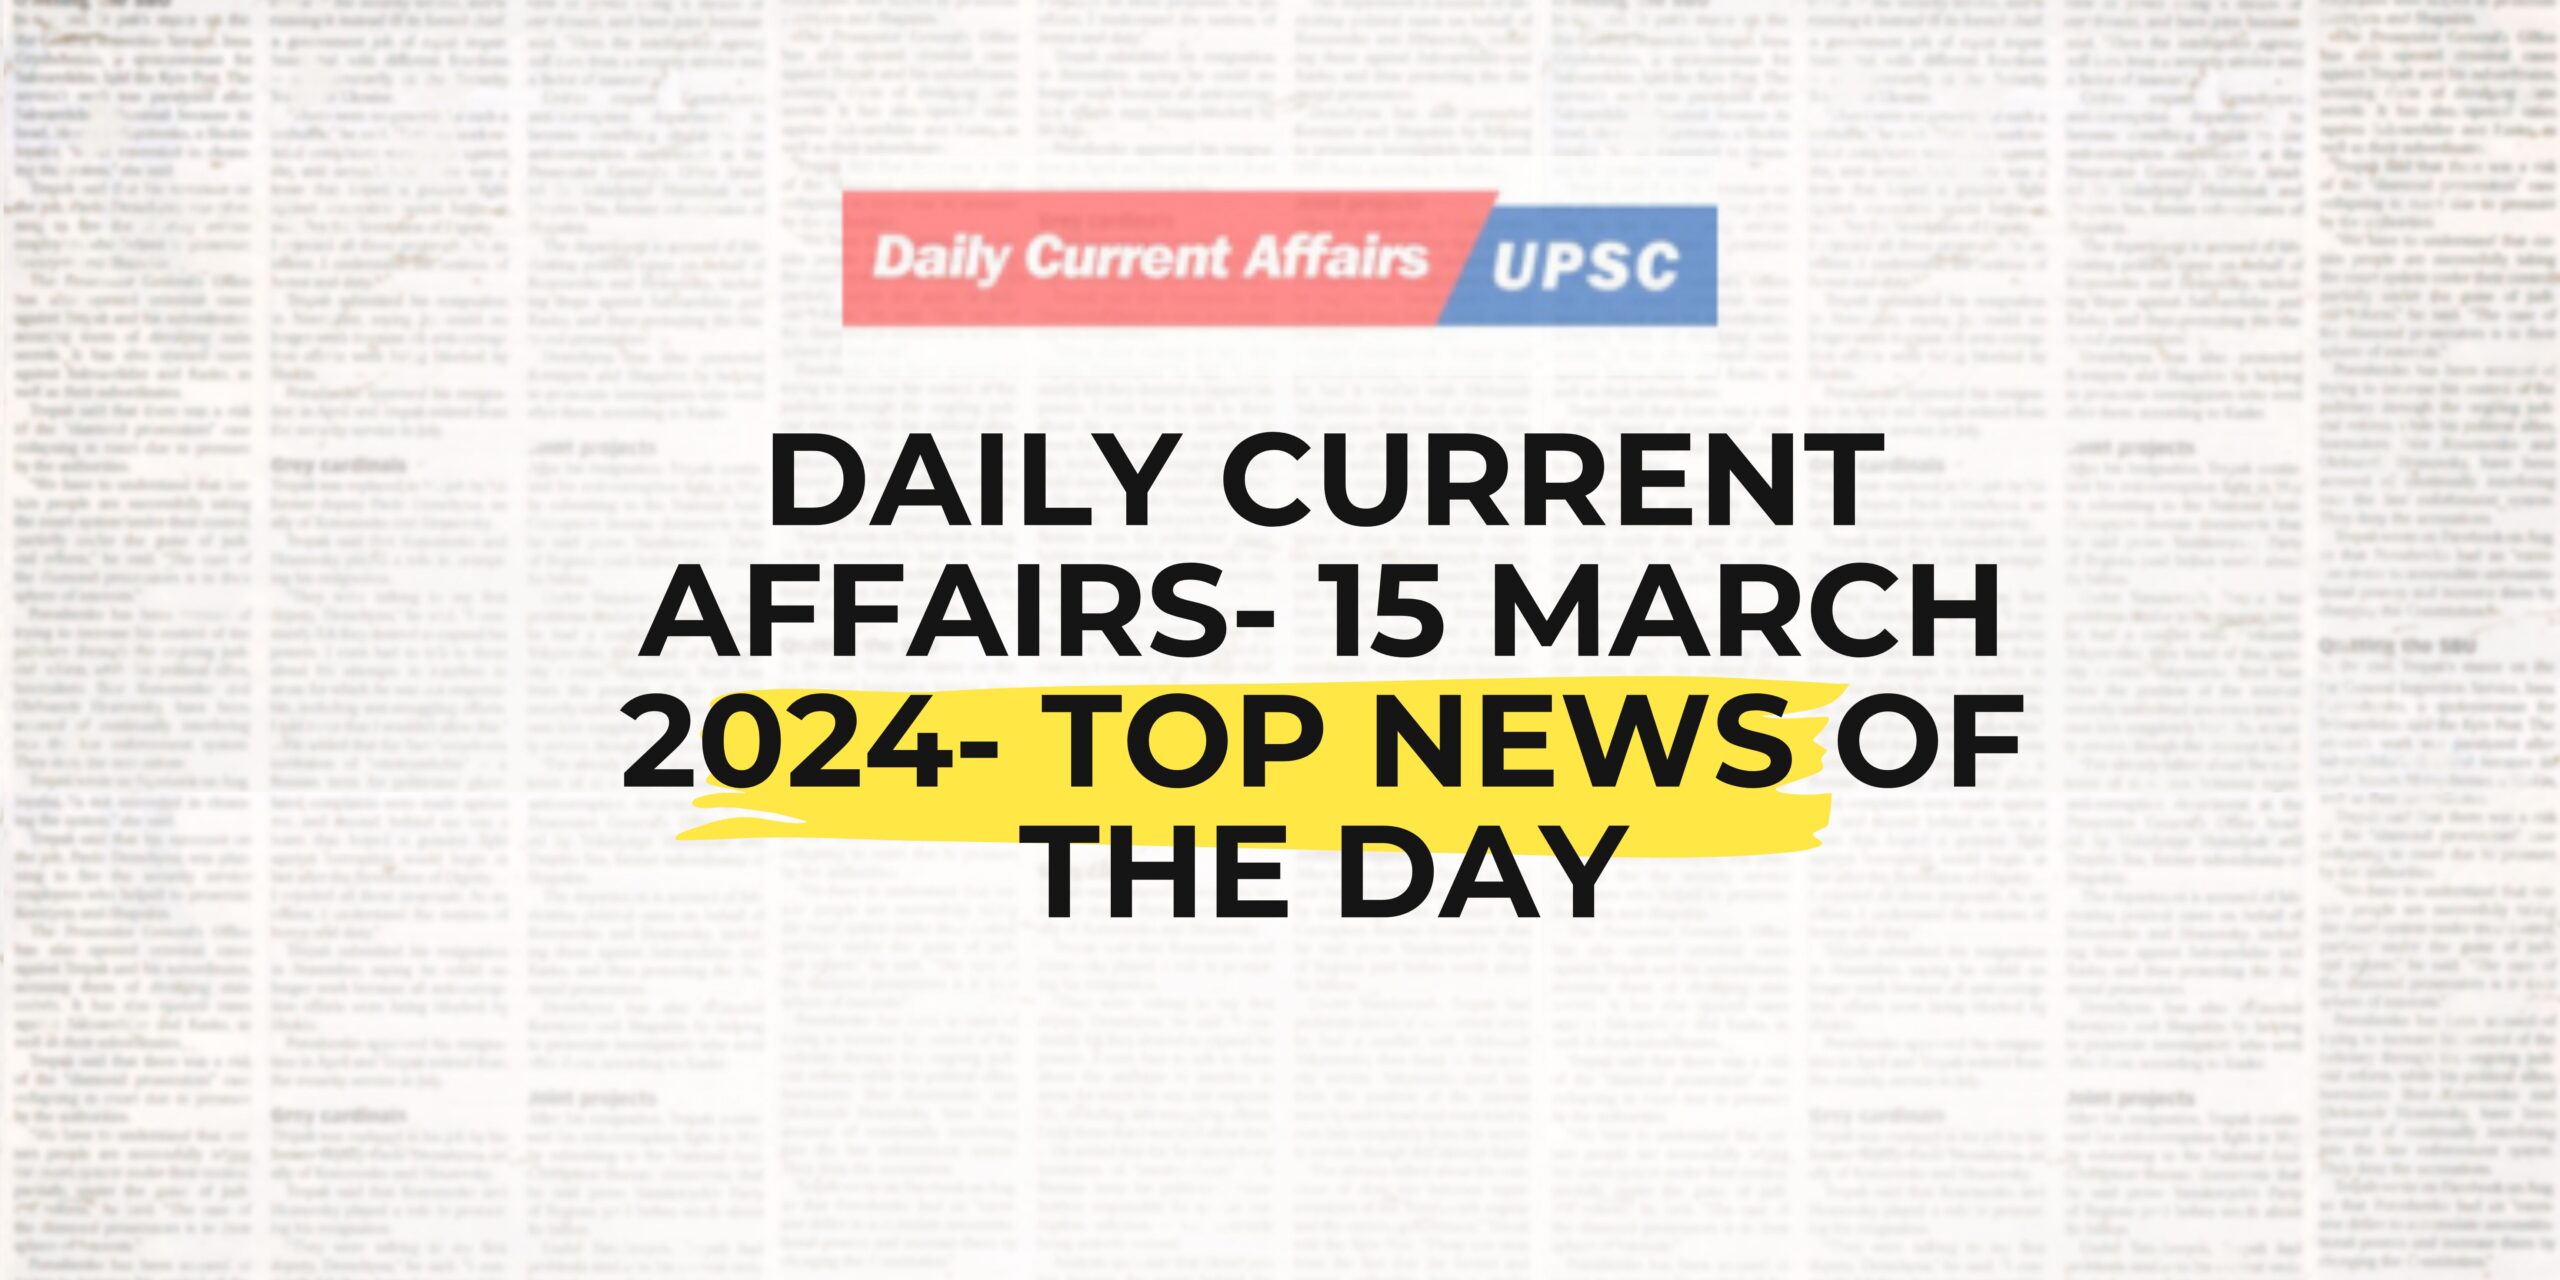 Daily Current Affairs 15 March 2024- Top News Of The Day